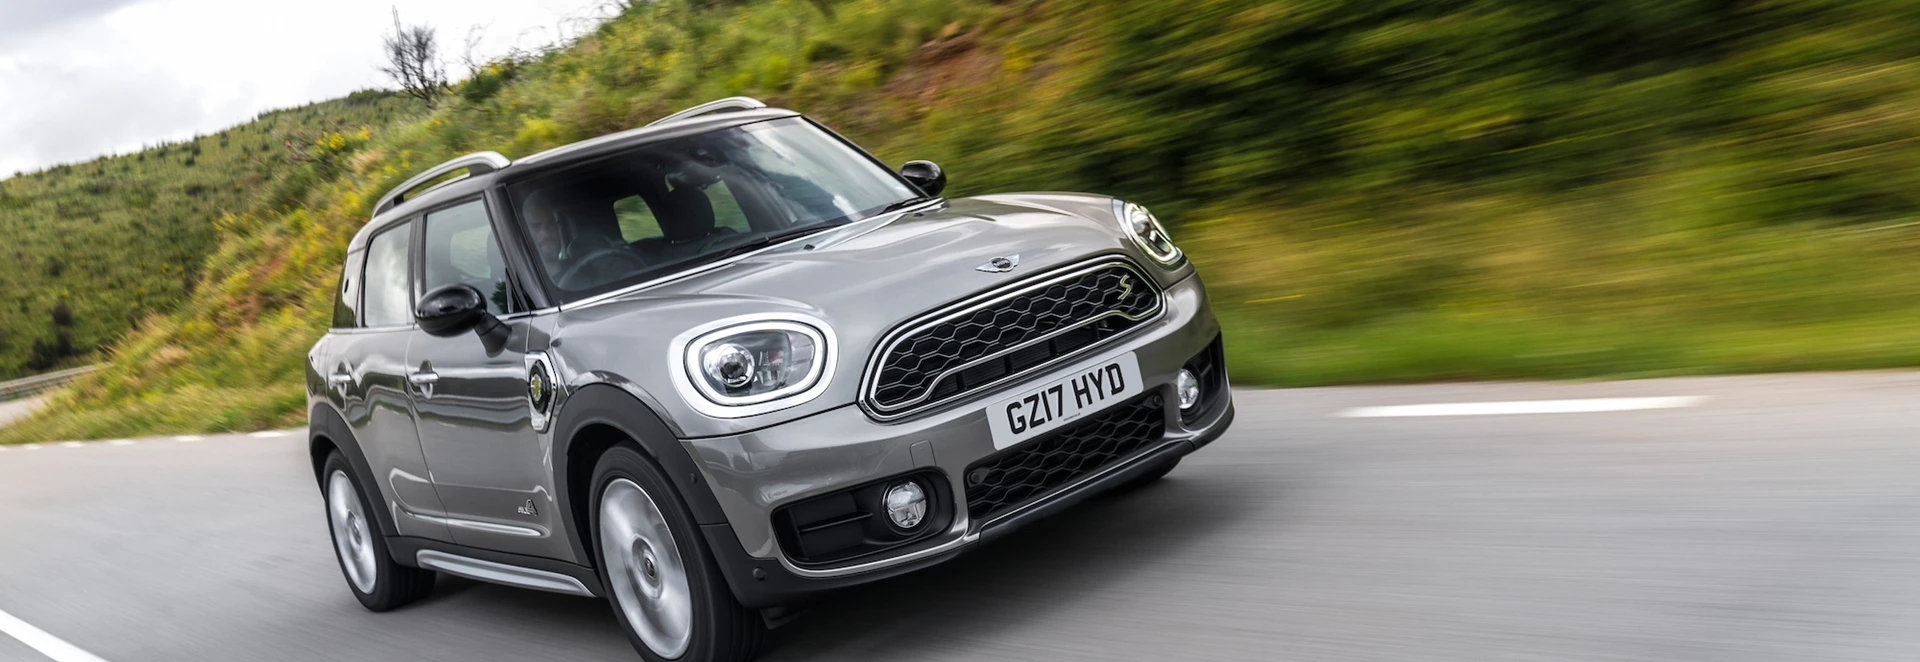 5 Facts you didn’t know about the Mini Countryman PHEV 